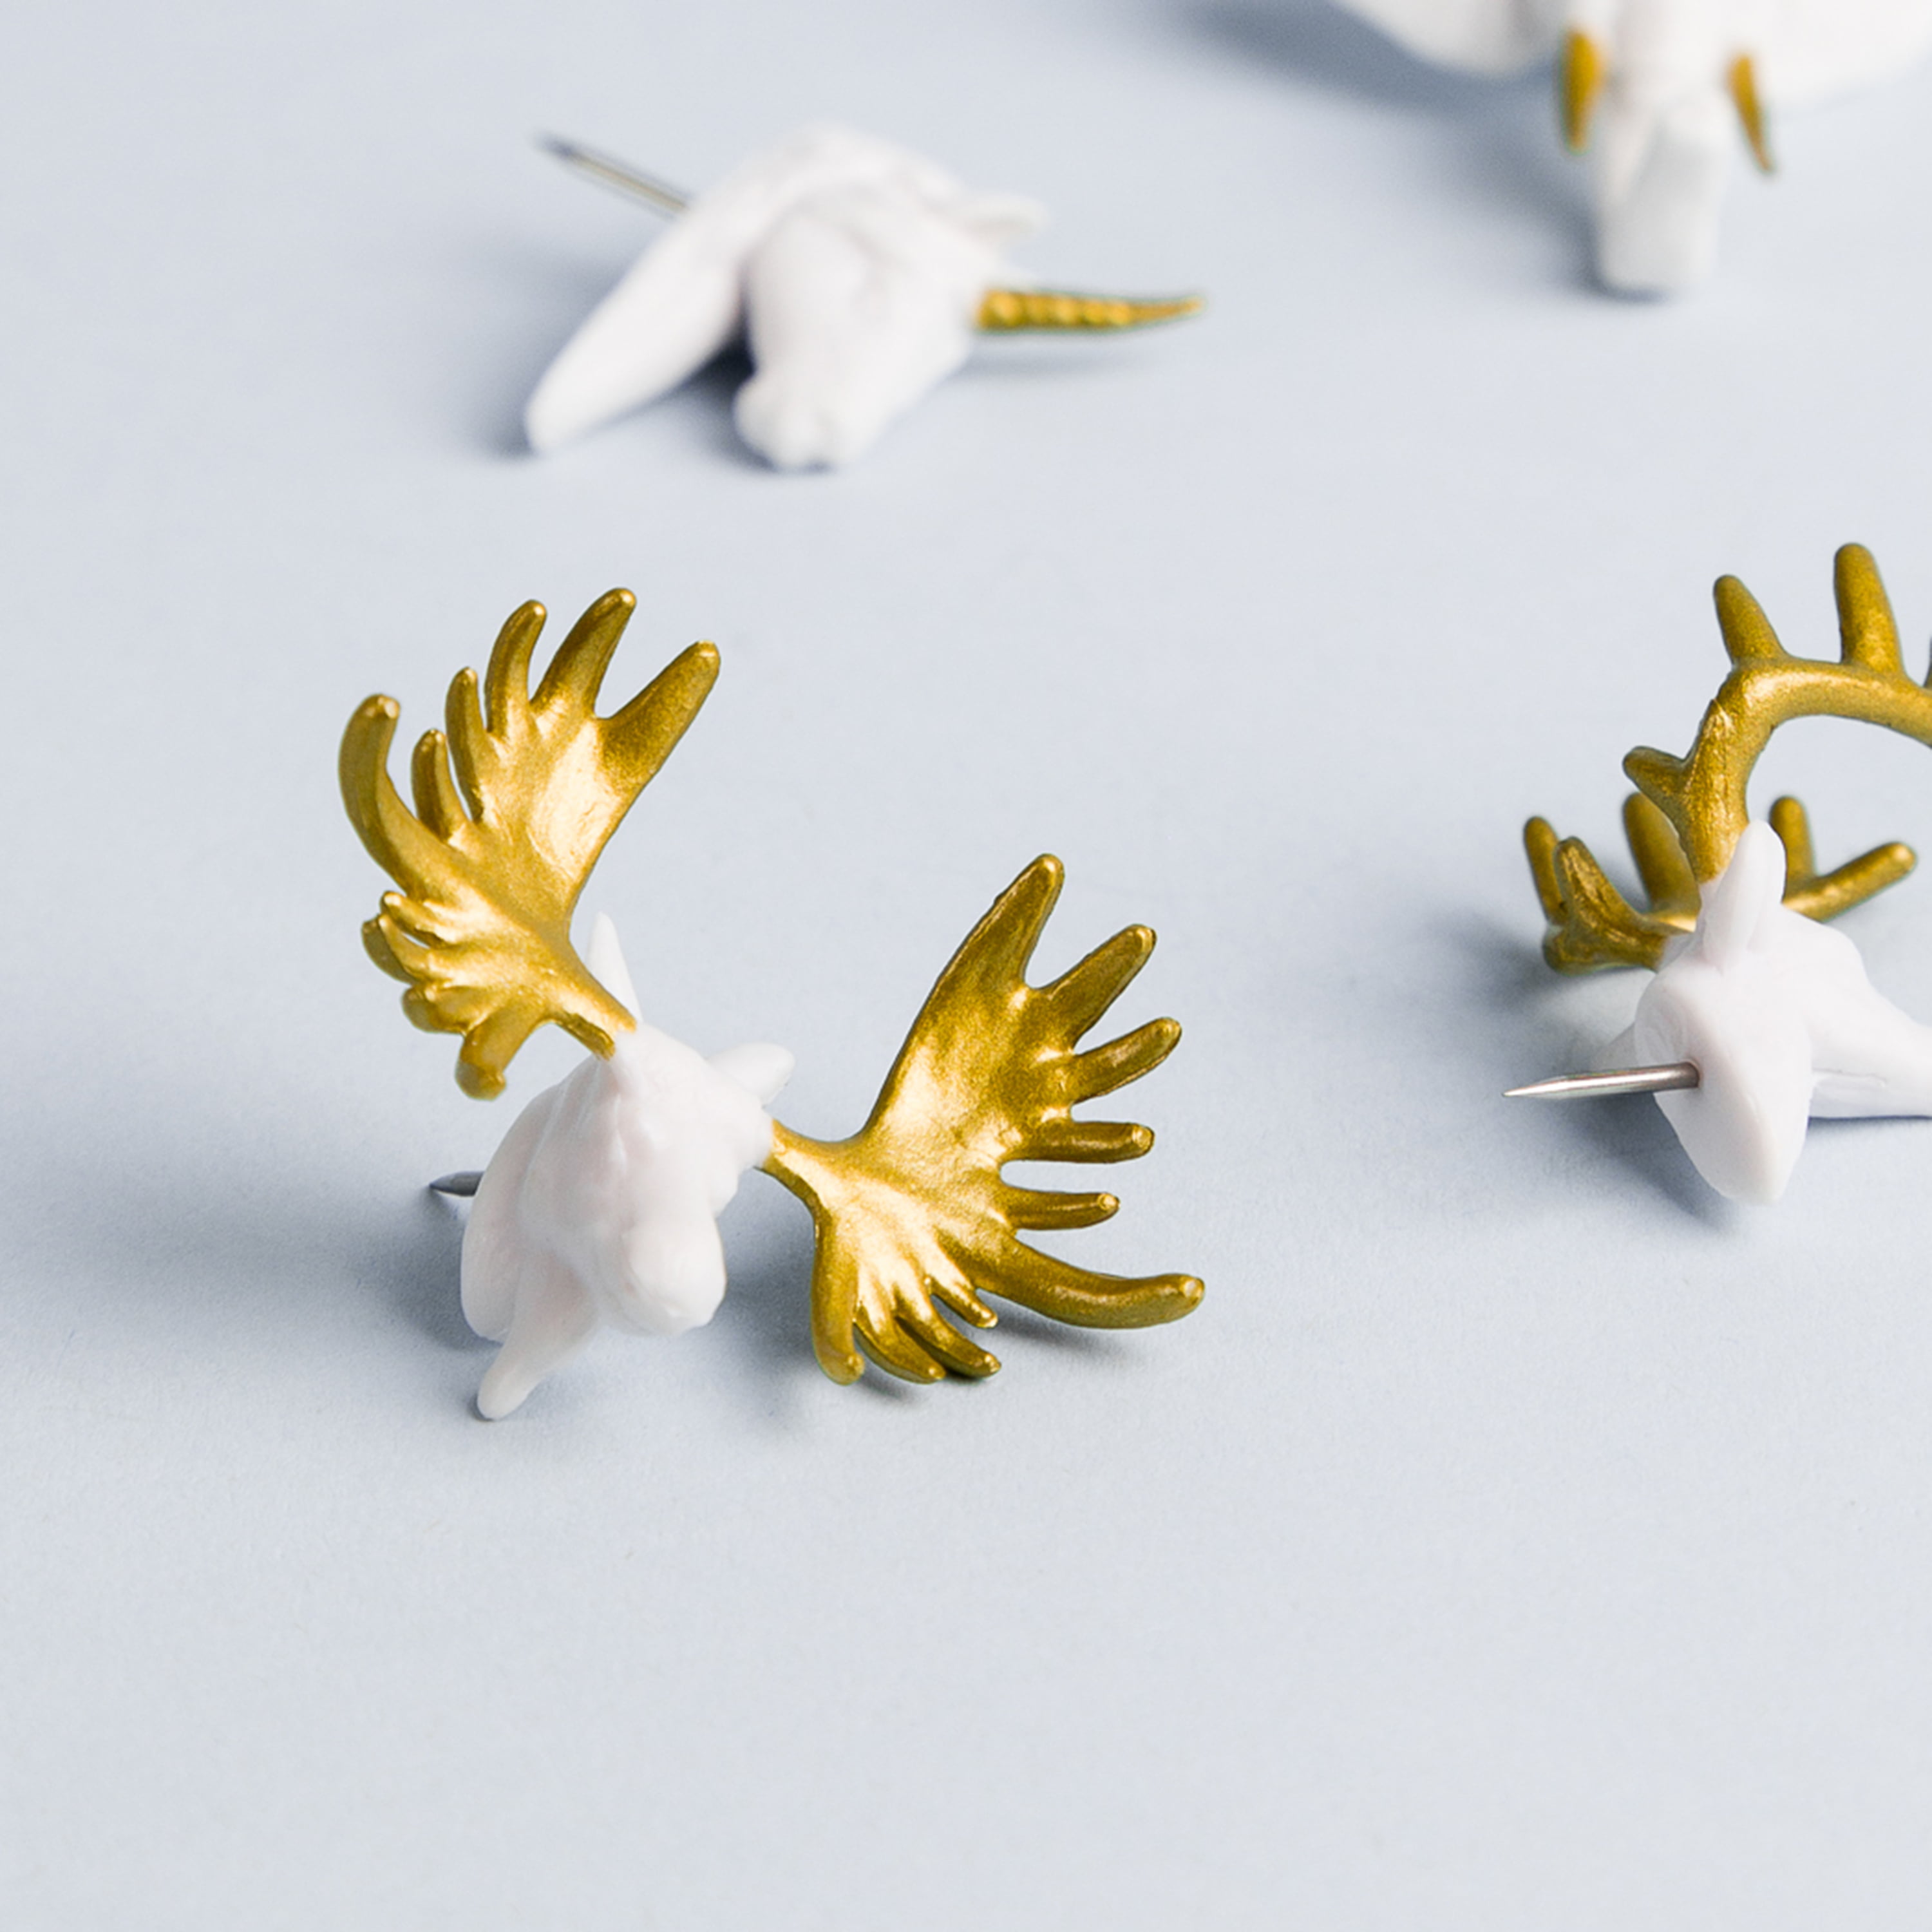 New White & Gold Pack of 6 099U0624 Animal Head Push Pins by U Brands 